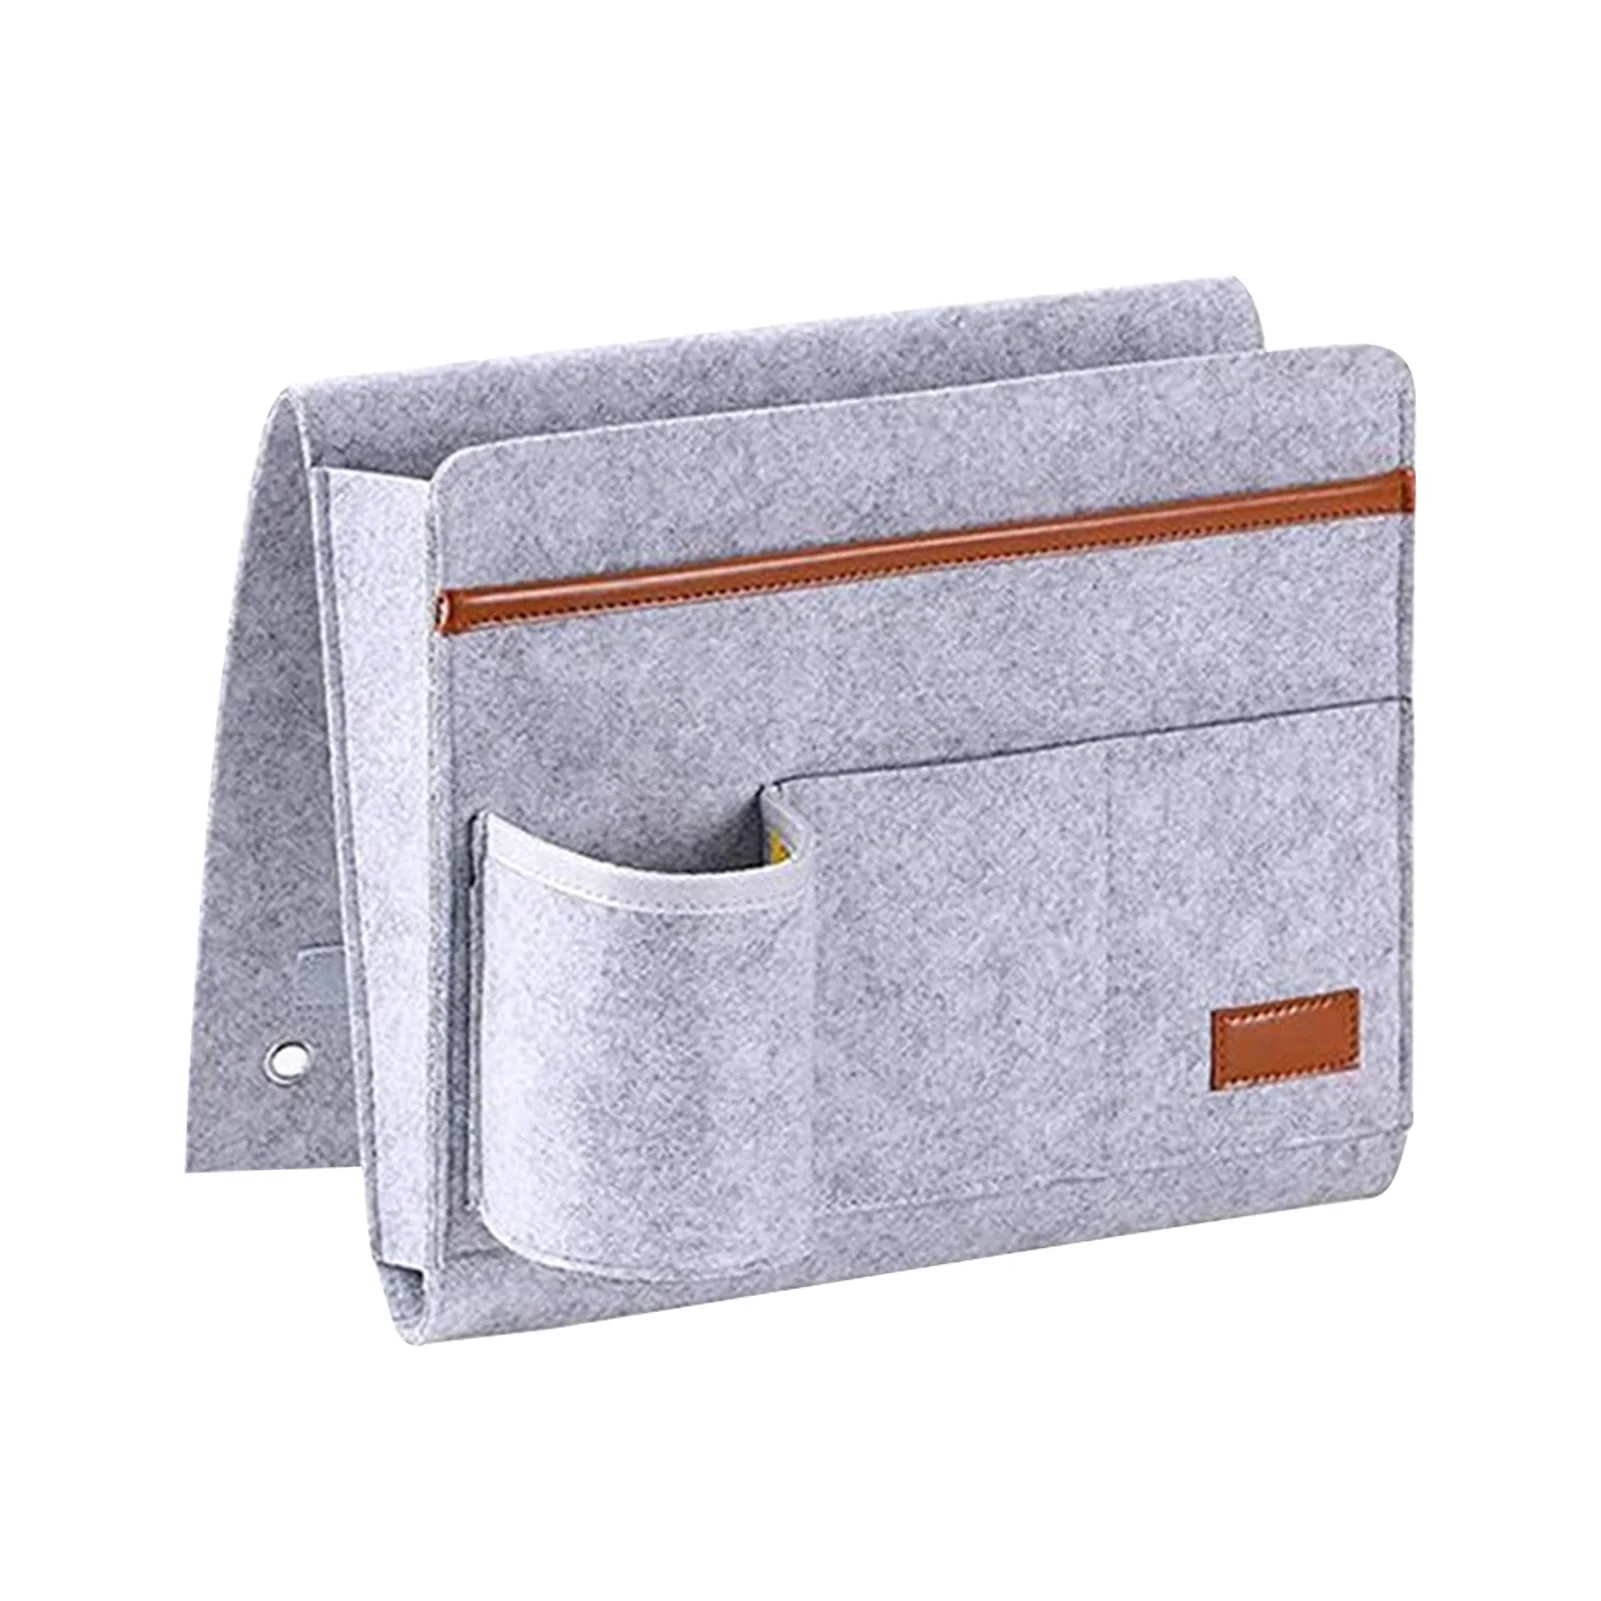 

Felt Bed Sofa Foldable Home Portable Magazines Books Organizer Holding Laptop Chair Hanging Bedside Caddy Bag College Dorm